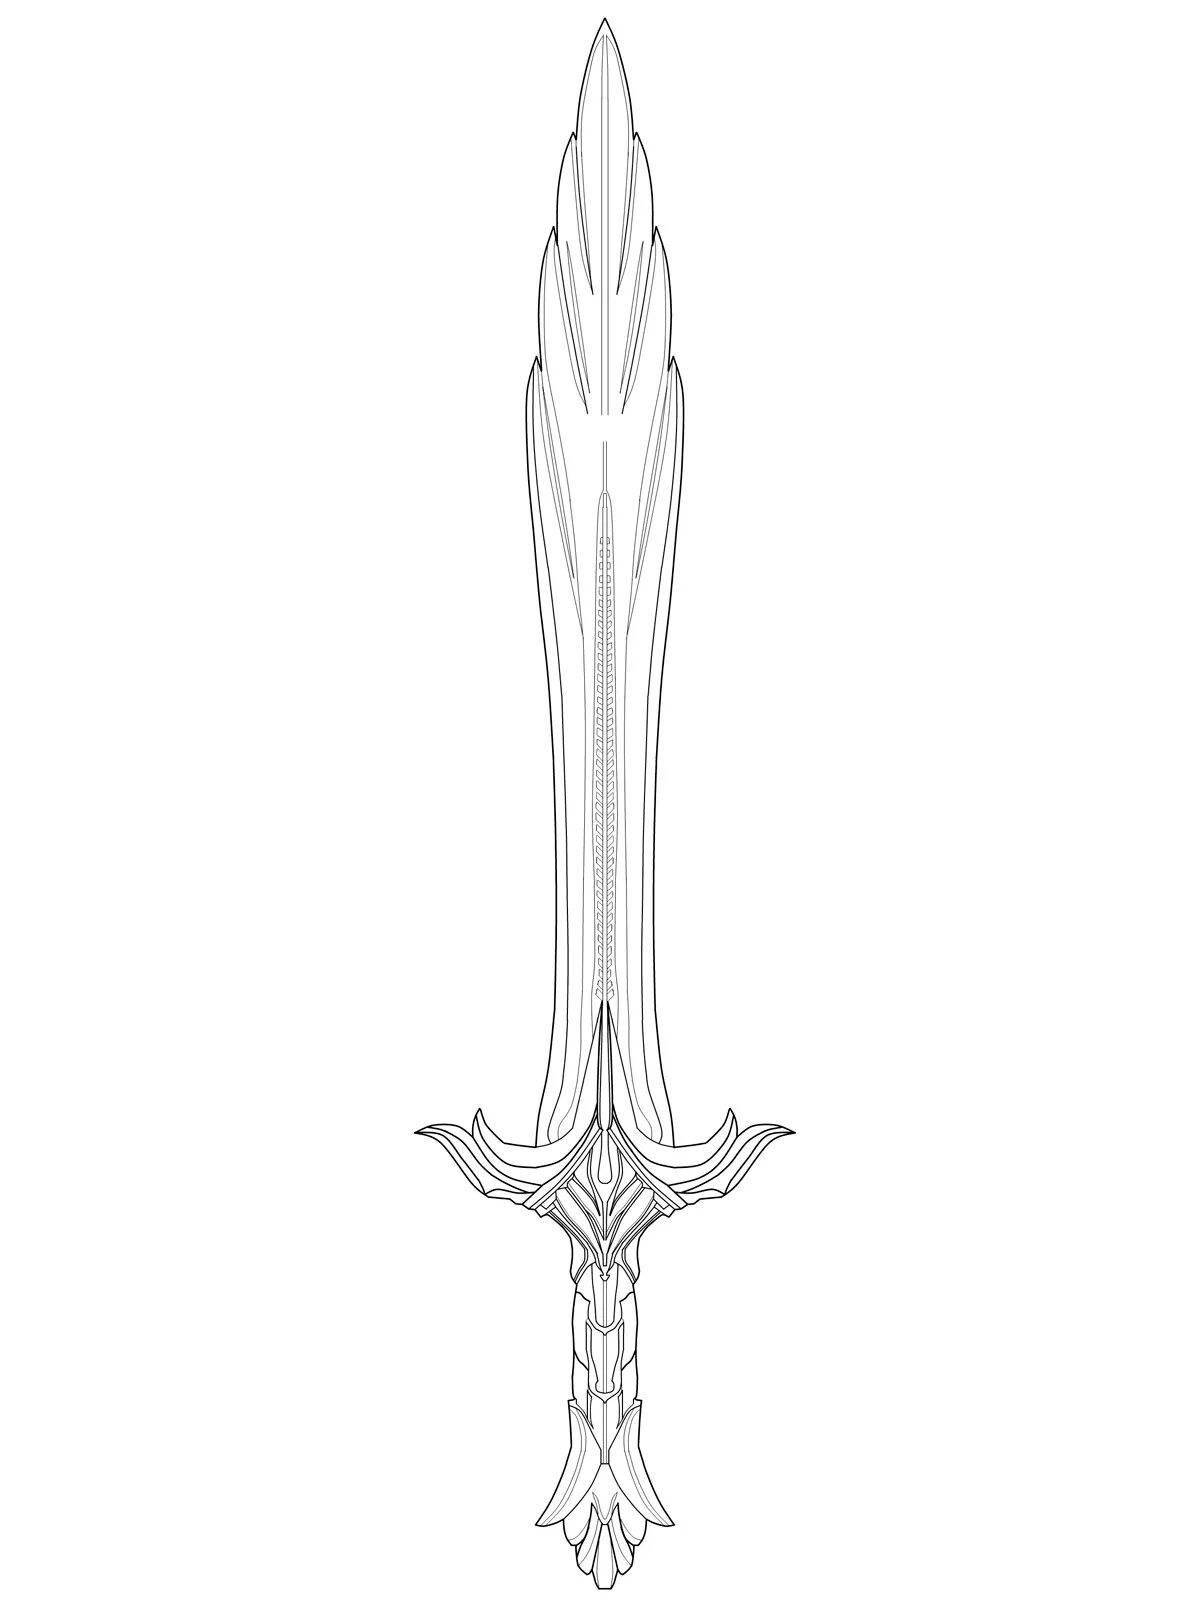 Colouring awesome treasurer's sword